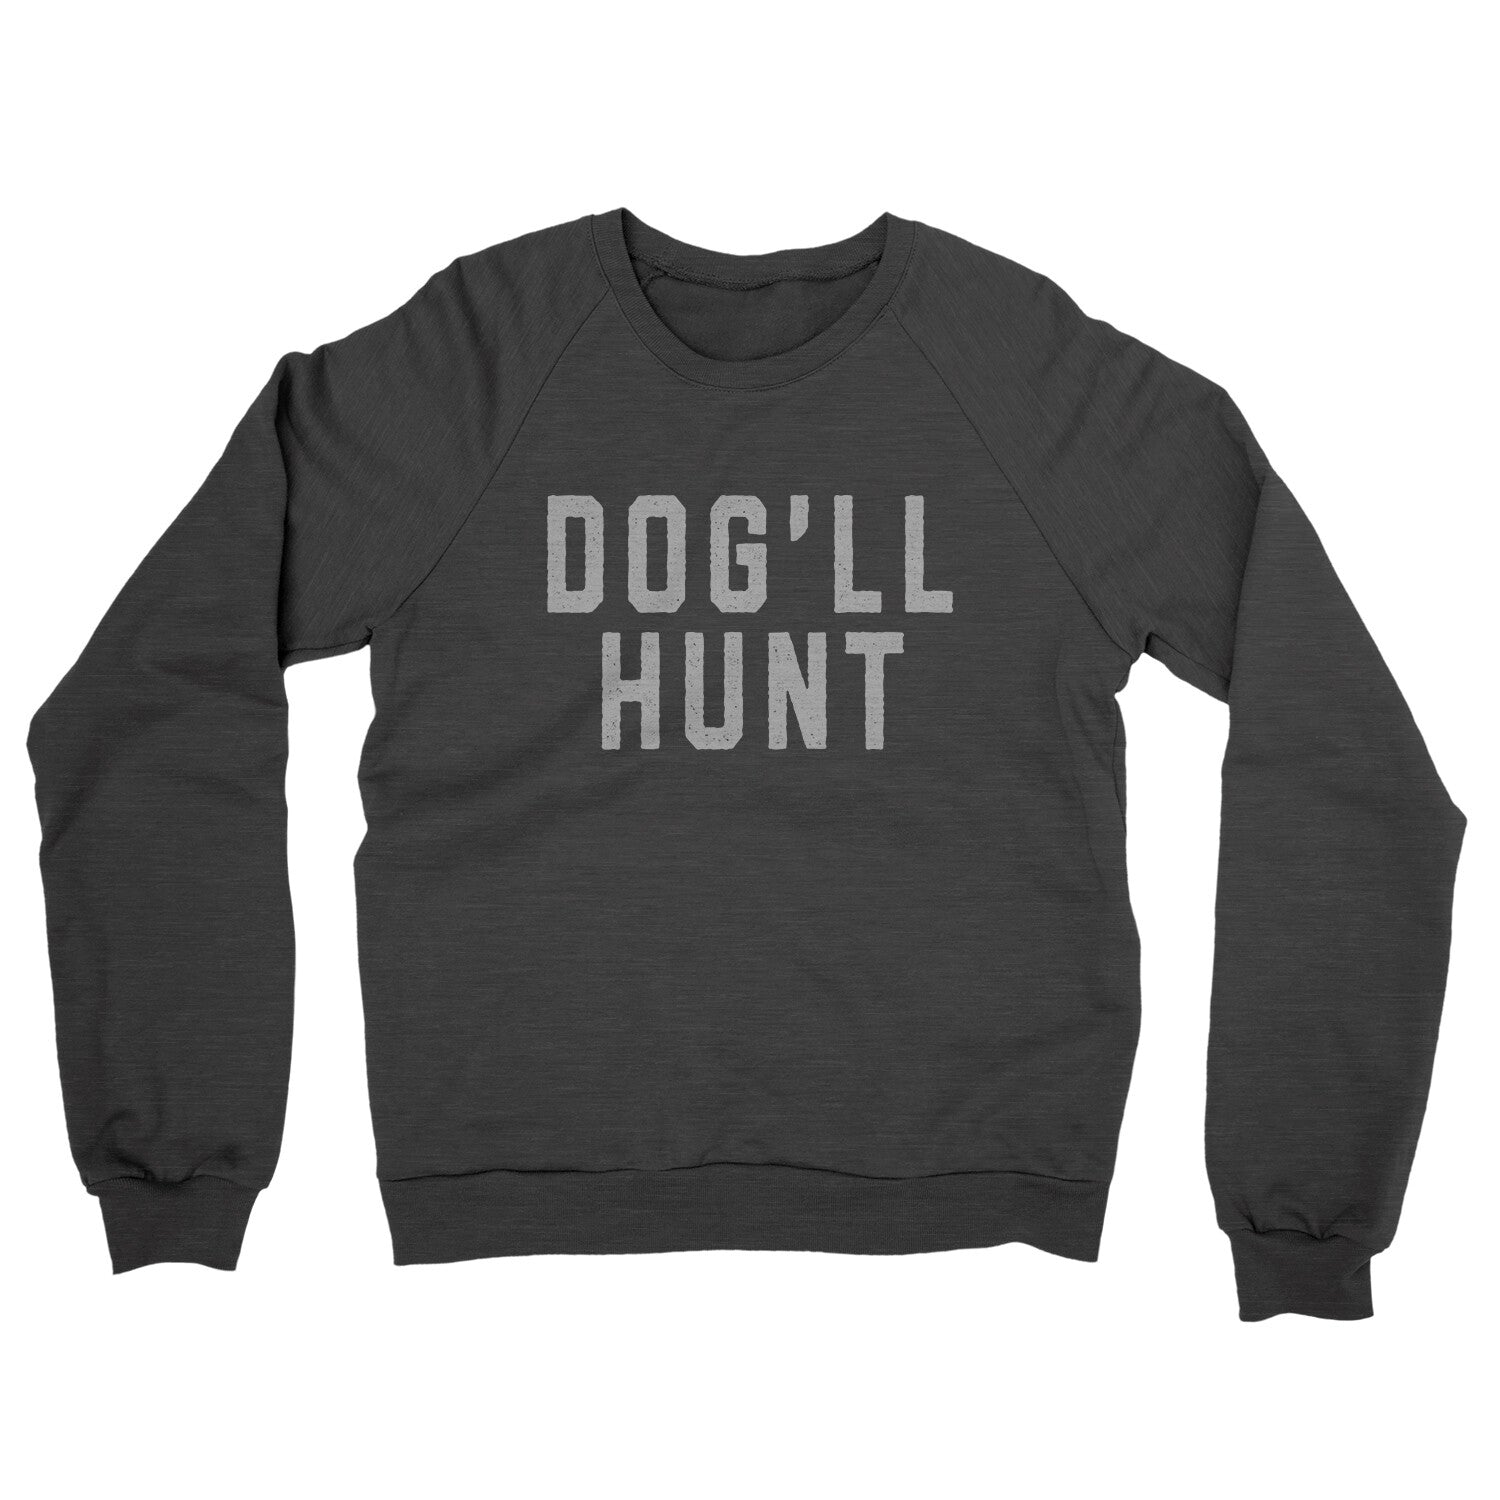 Dog’ll Hunt in Charcoal Heather Color